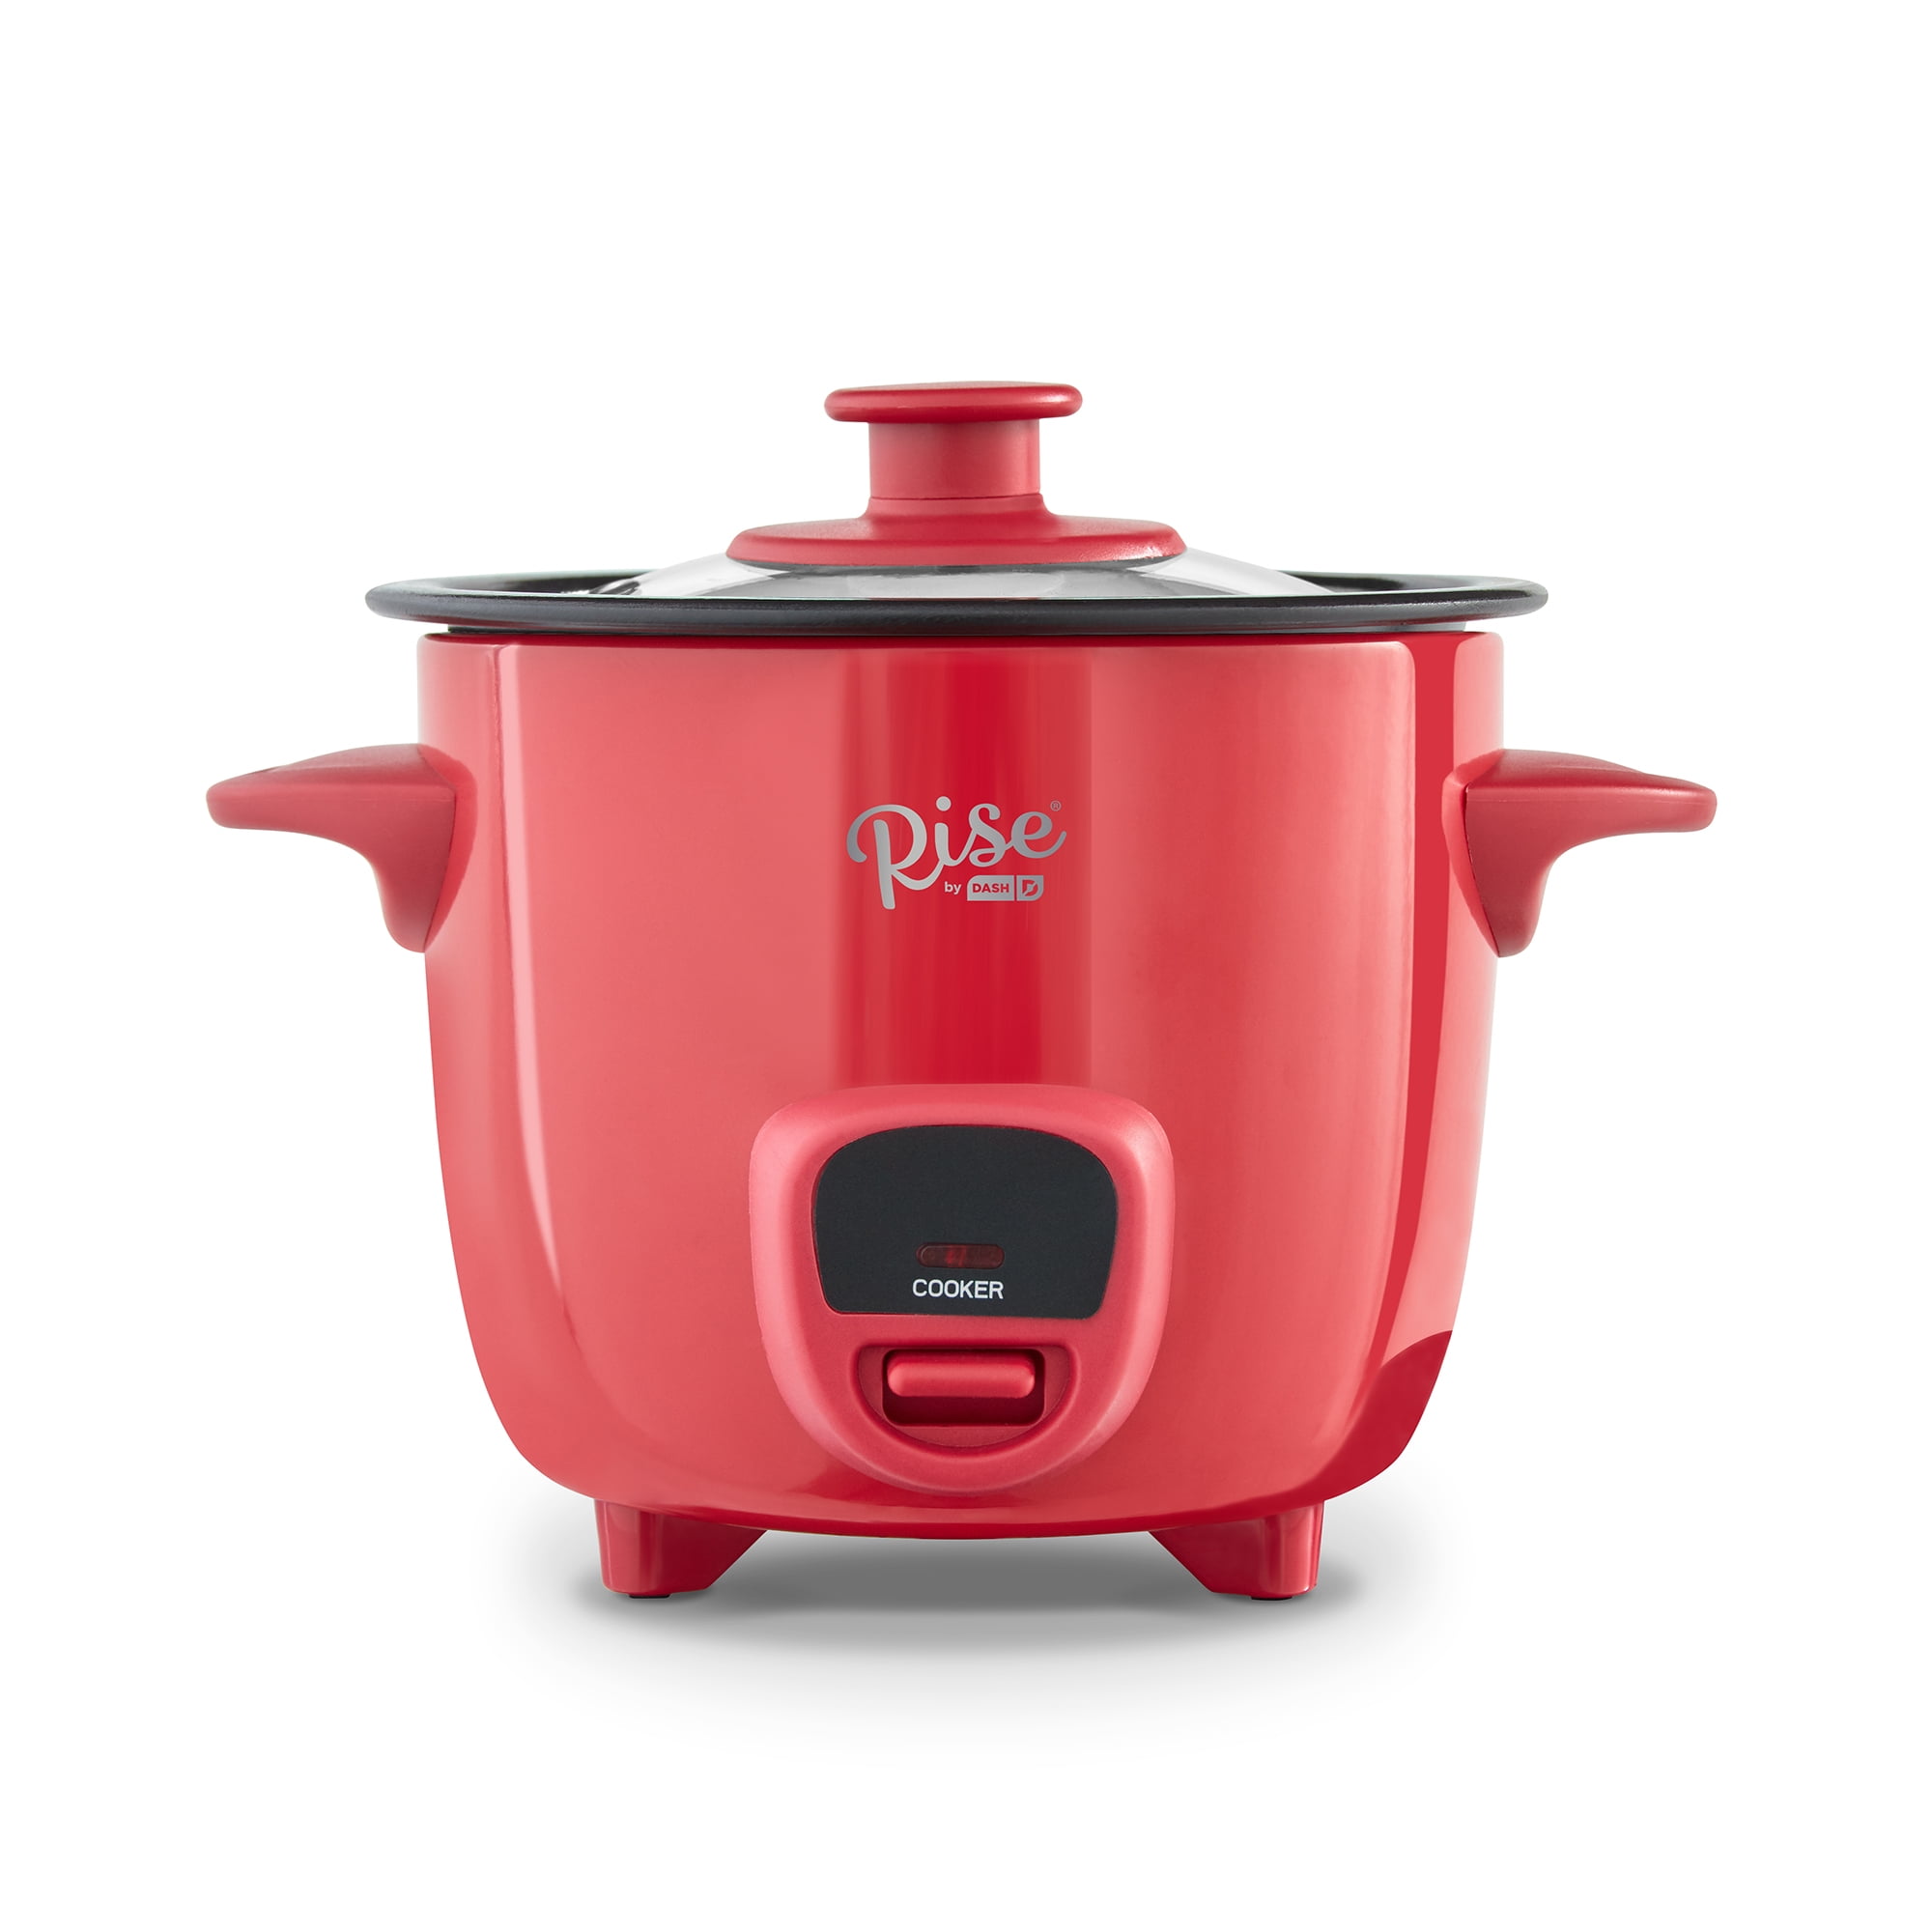 DASH Mini Rice Cooker Removable Nonstick Pot Keep Warm Function 2 Cup Red